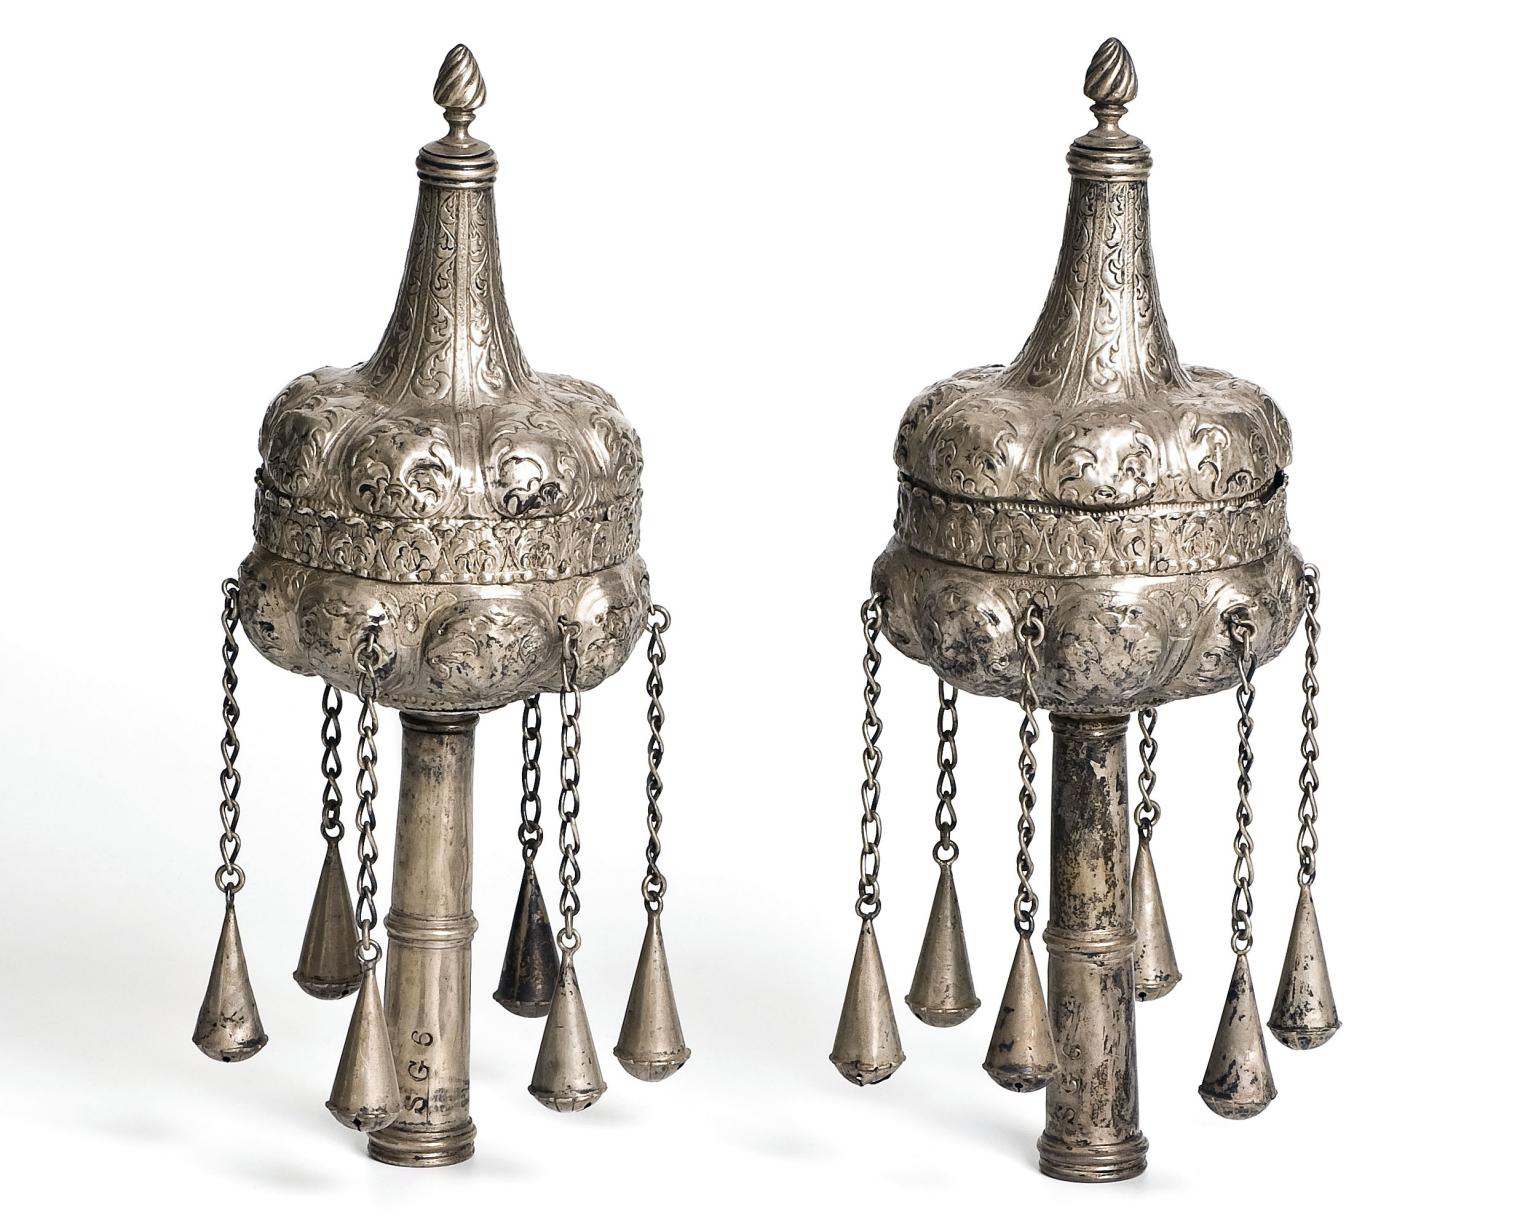 Pair of finials with decoration and chains hanging down. 